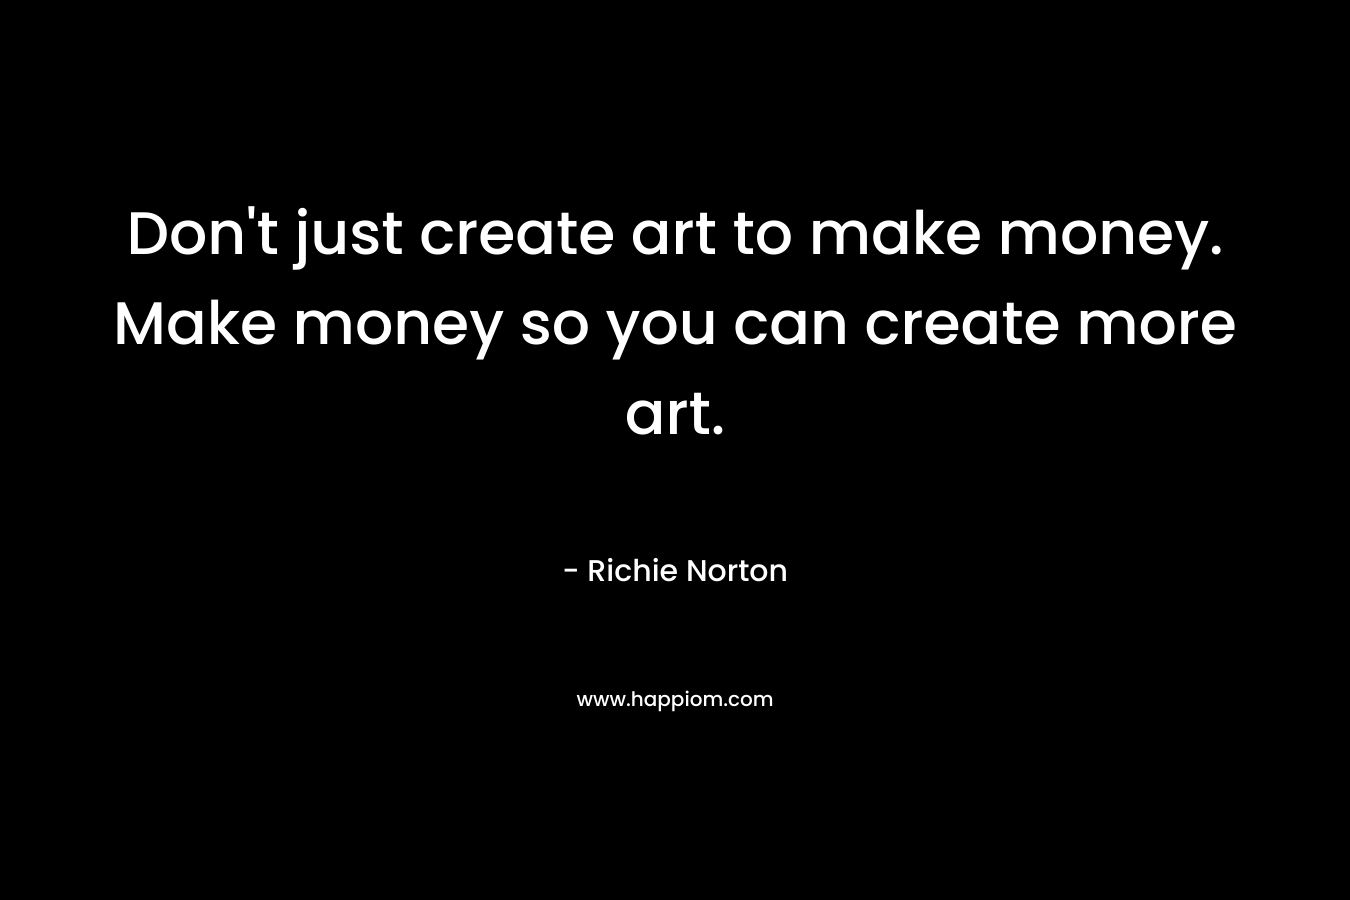 Don't just create art to make money. Make money so you can create more art.